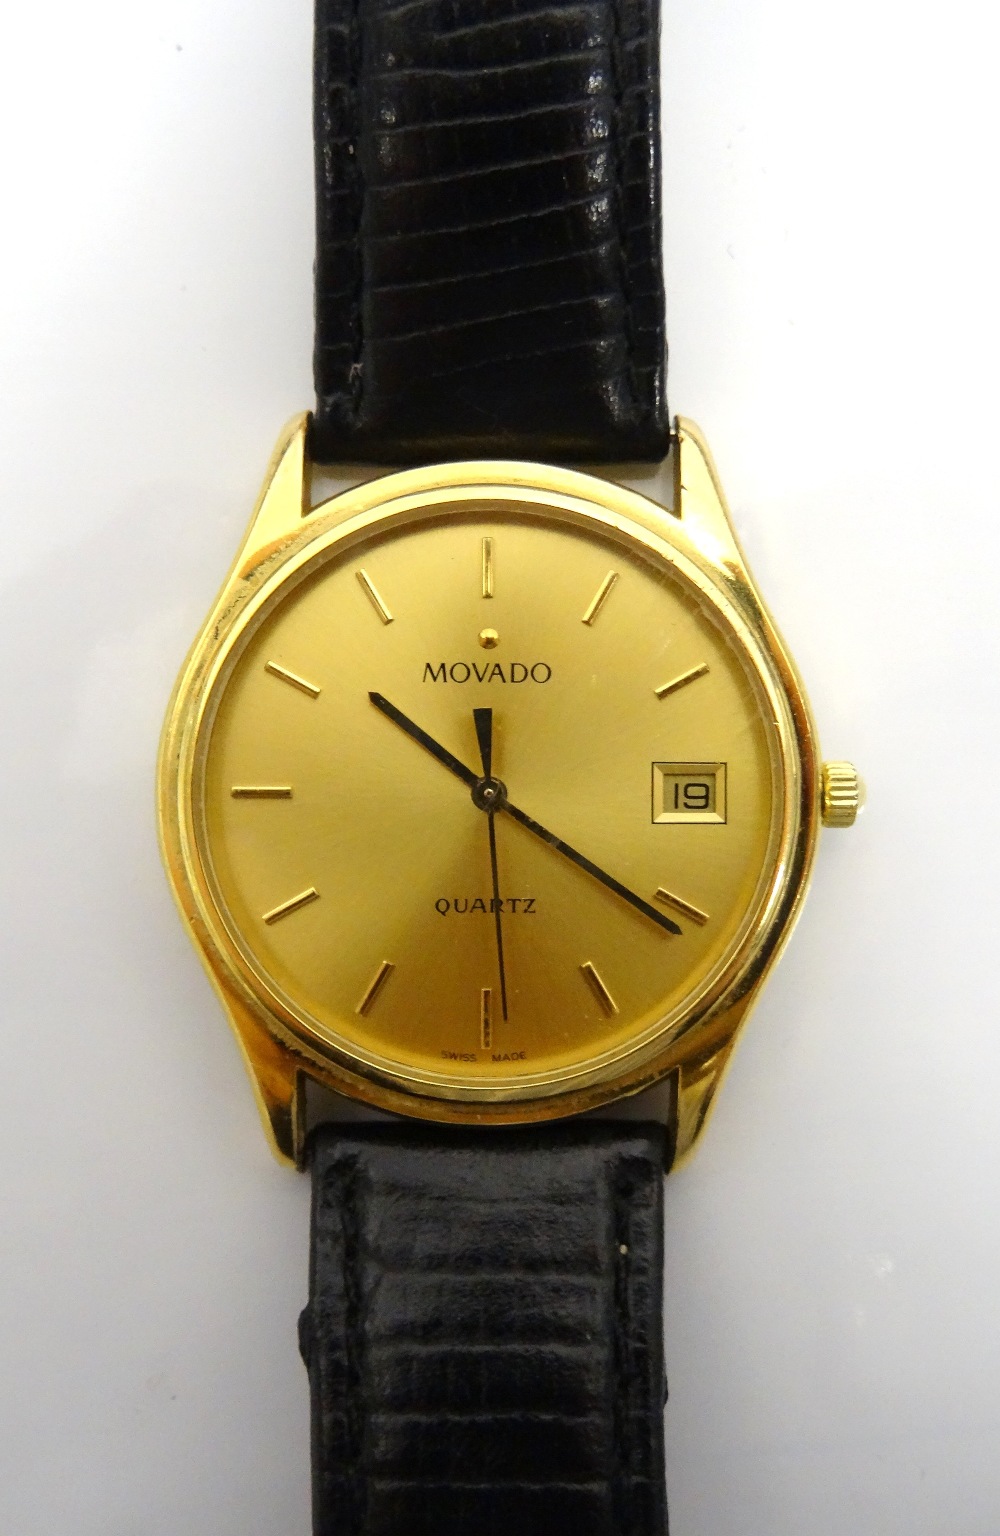 GENTLEMAN'S MOVADO WRISTWATCH the gilt dial with baton five minute markers and date aperture,